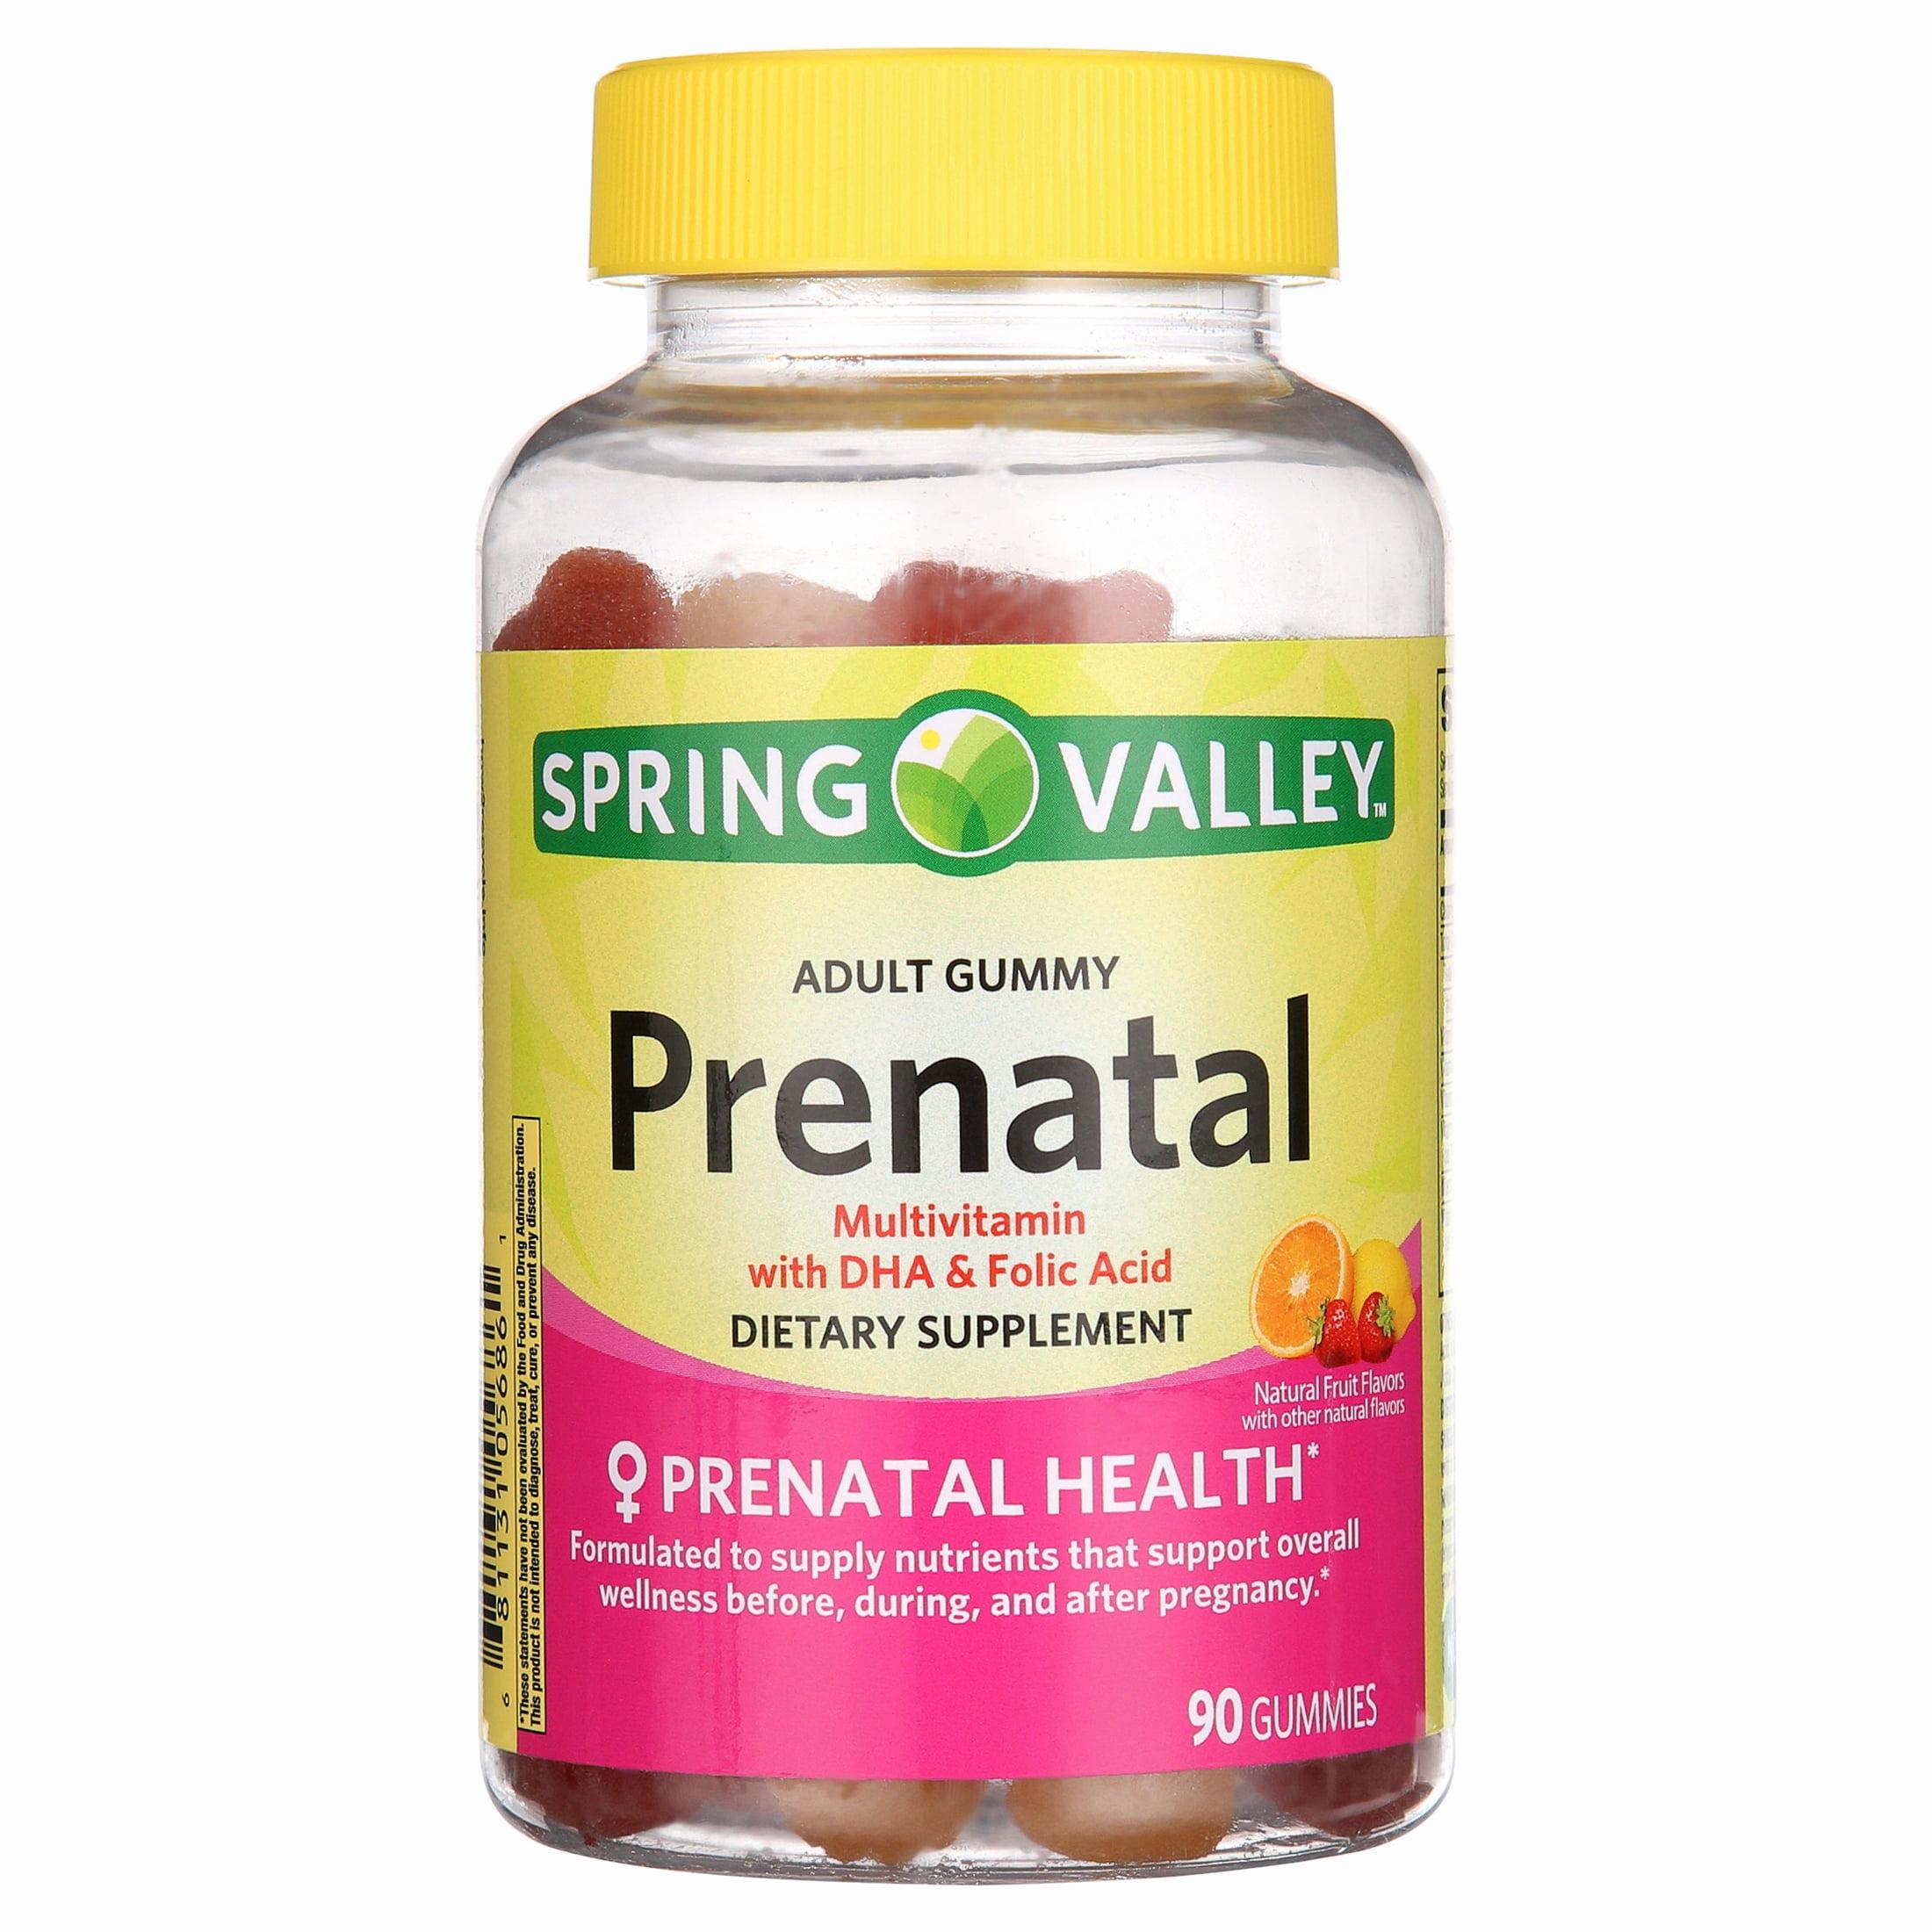 A bottle of Spring Valley Adult Gummy Prenatal Multivitamin with DHA and Folic Acid.